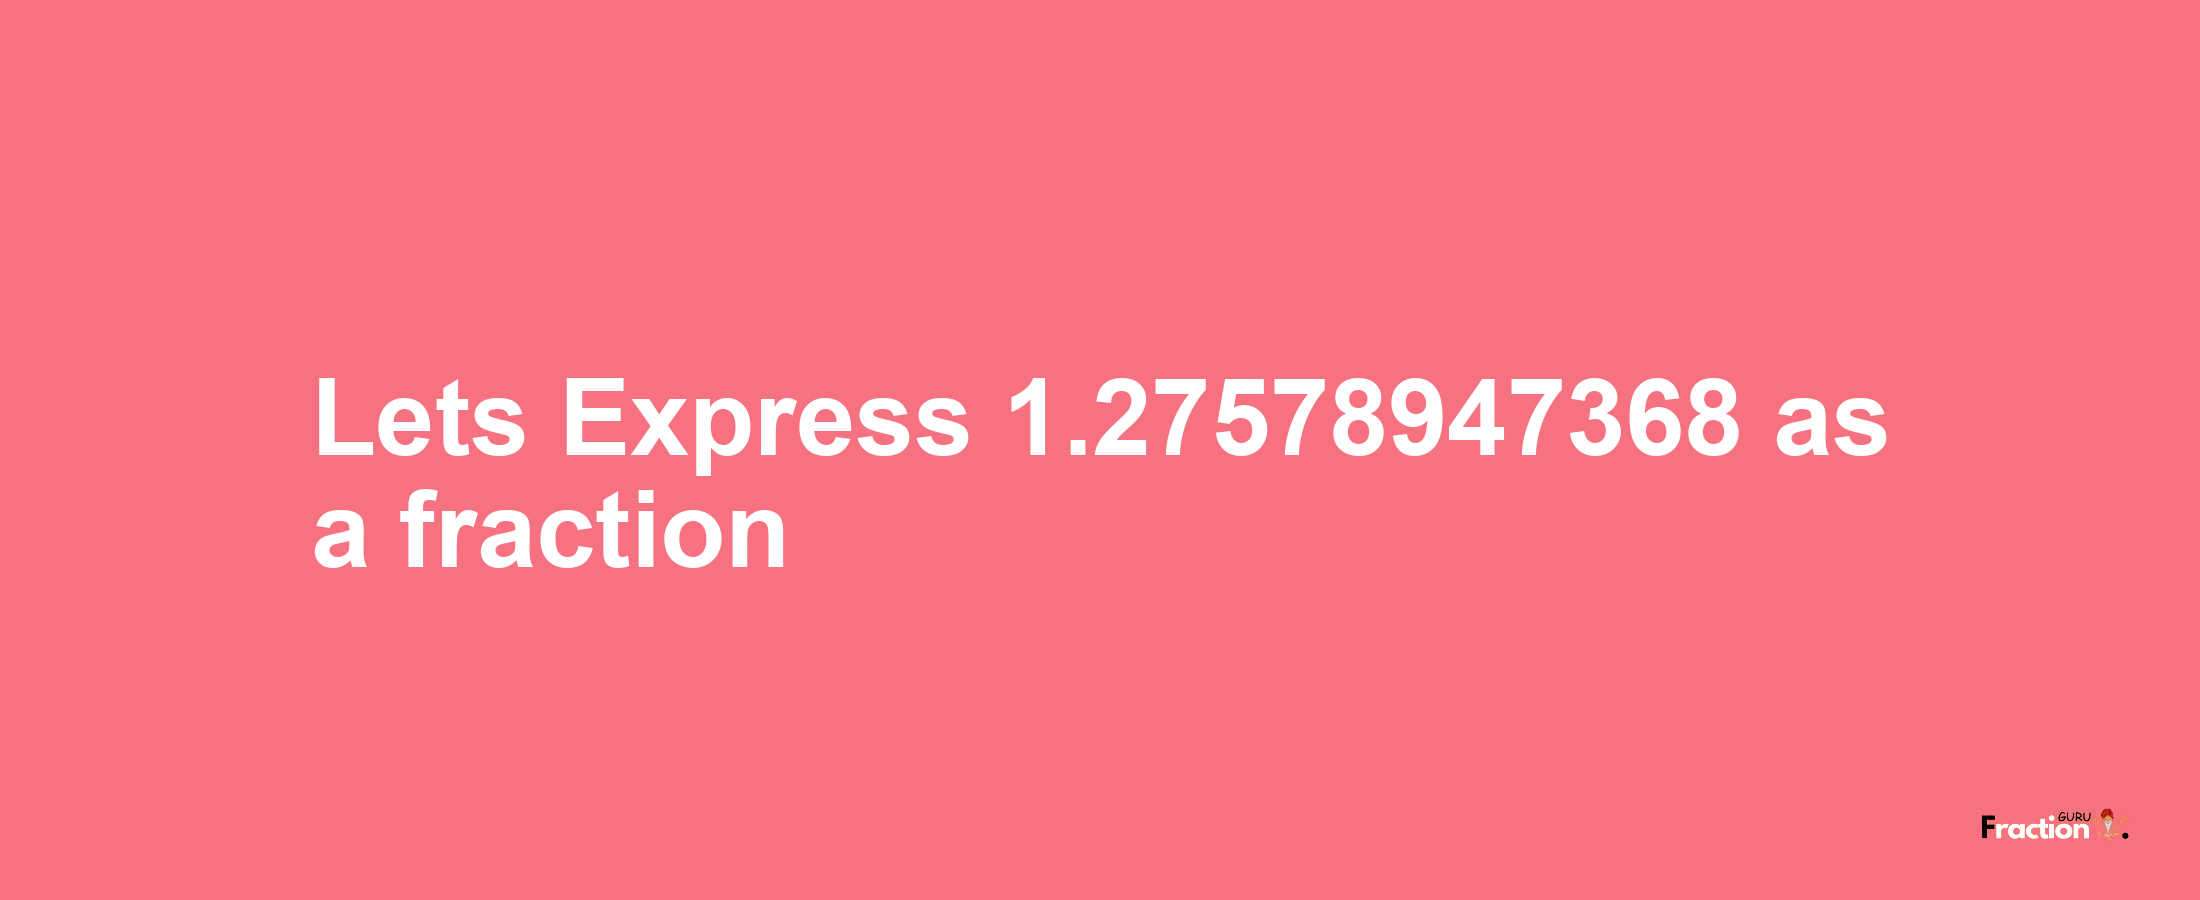 Lets Express 1.27578947368 as afraction